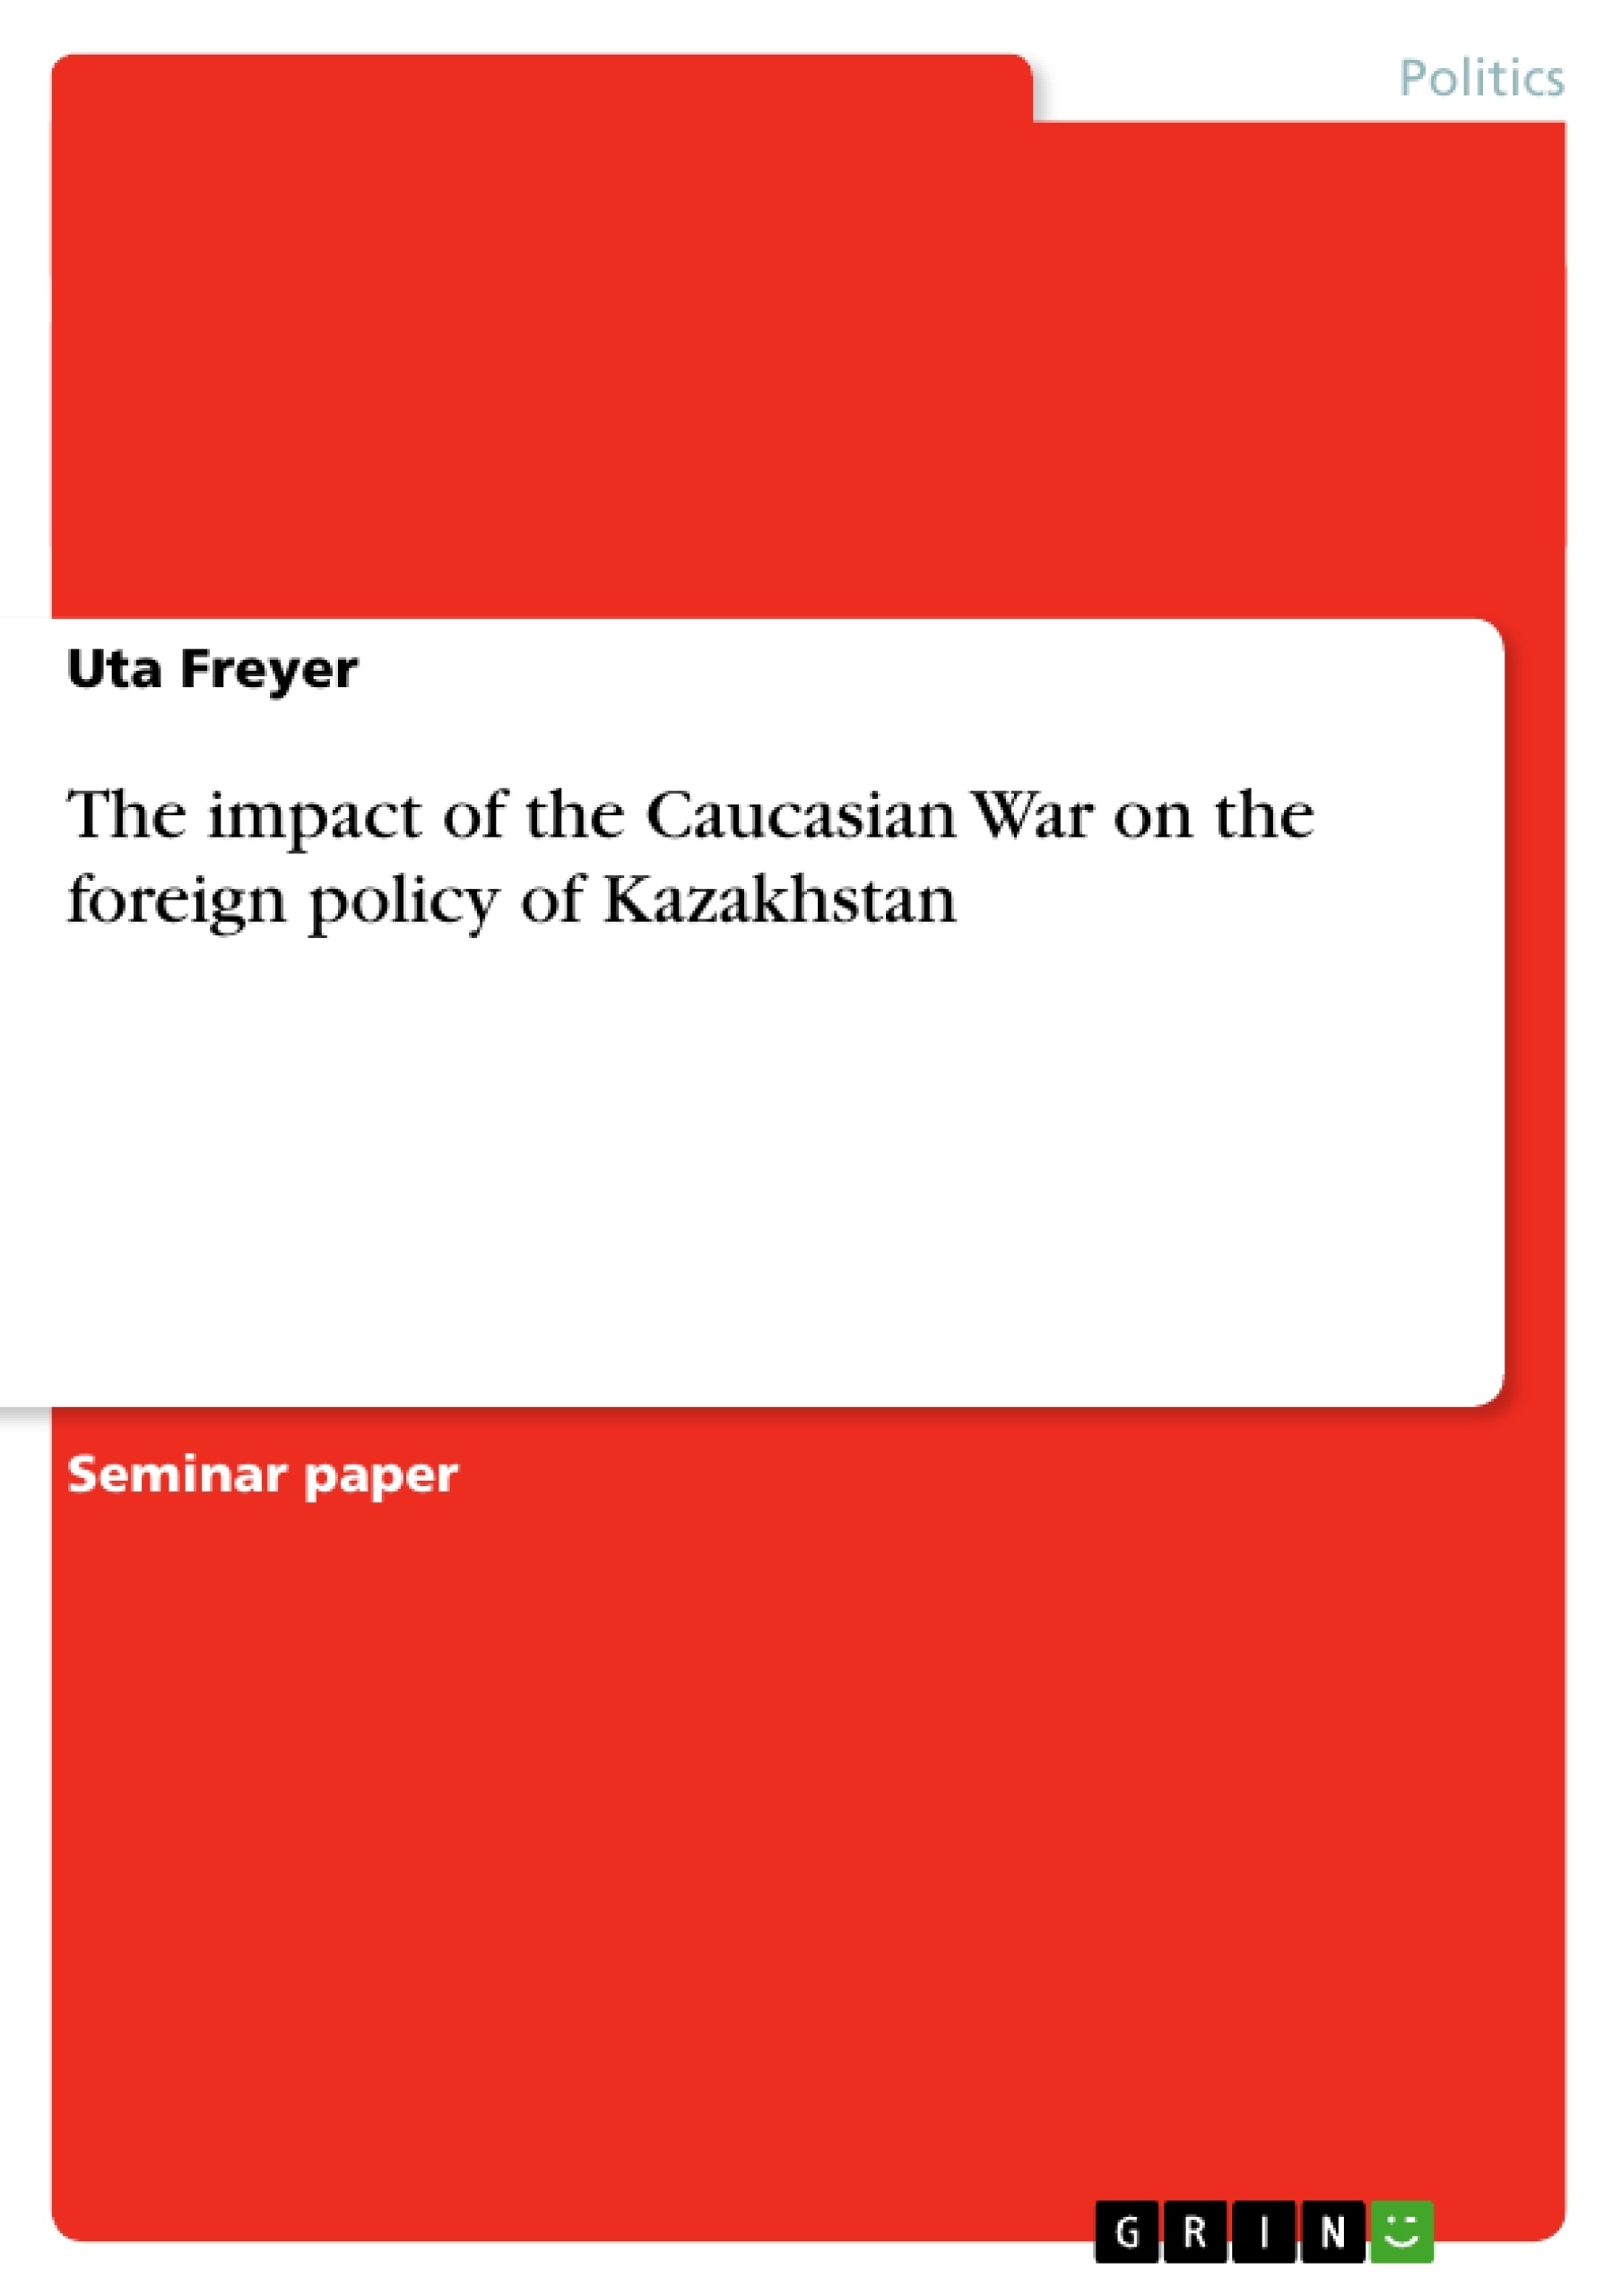 Titre: The impact of the Caucasian War on the foreign policy of Kazakhstan